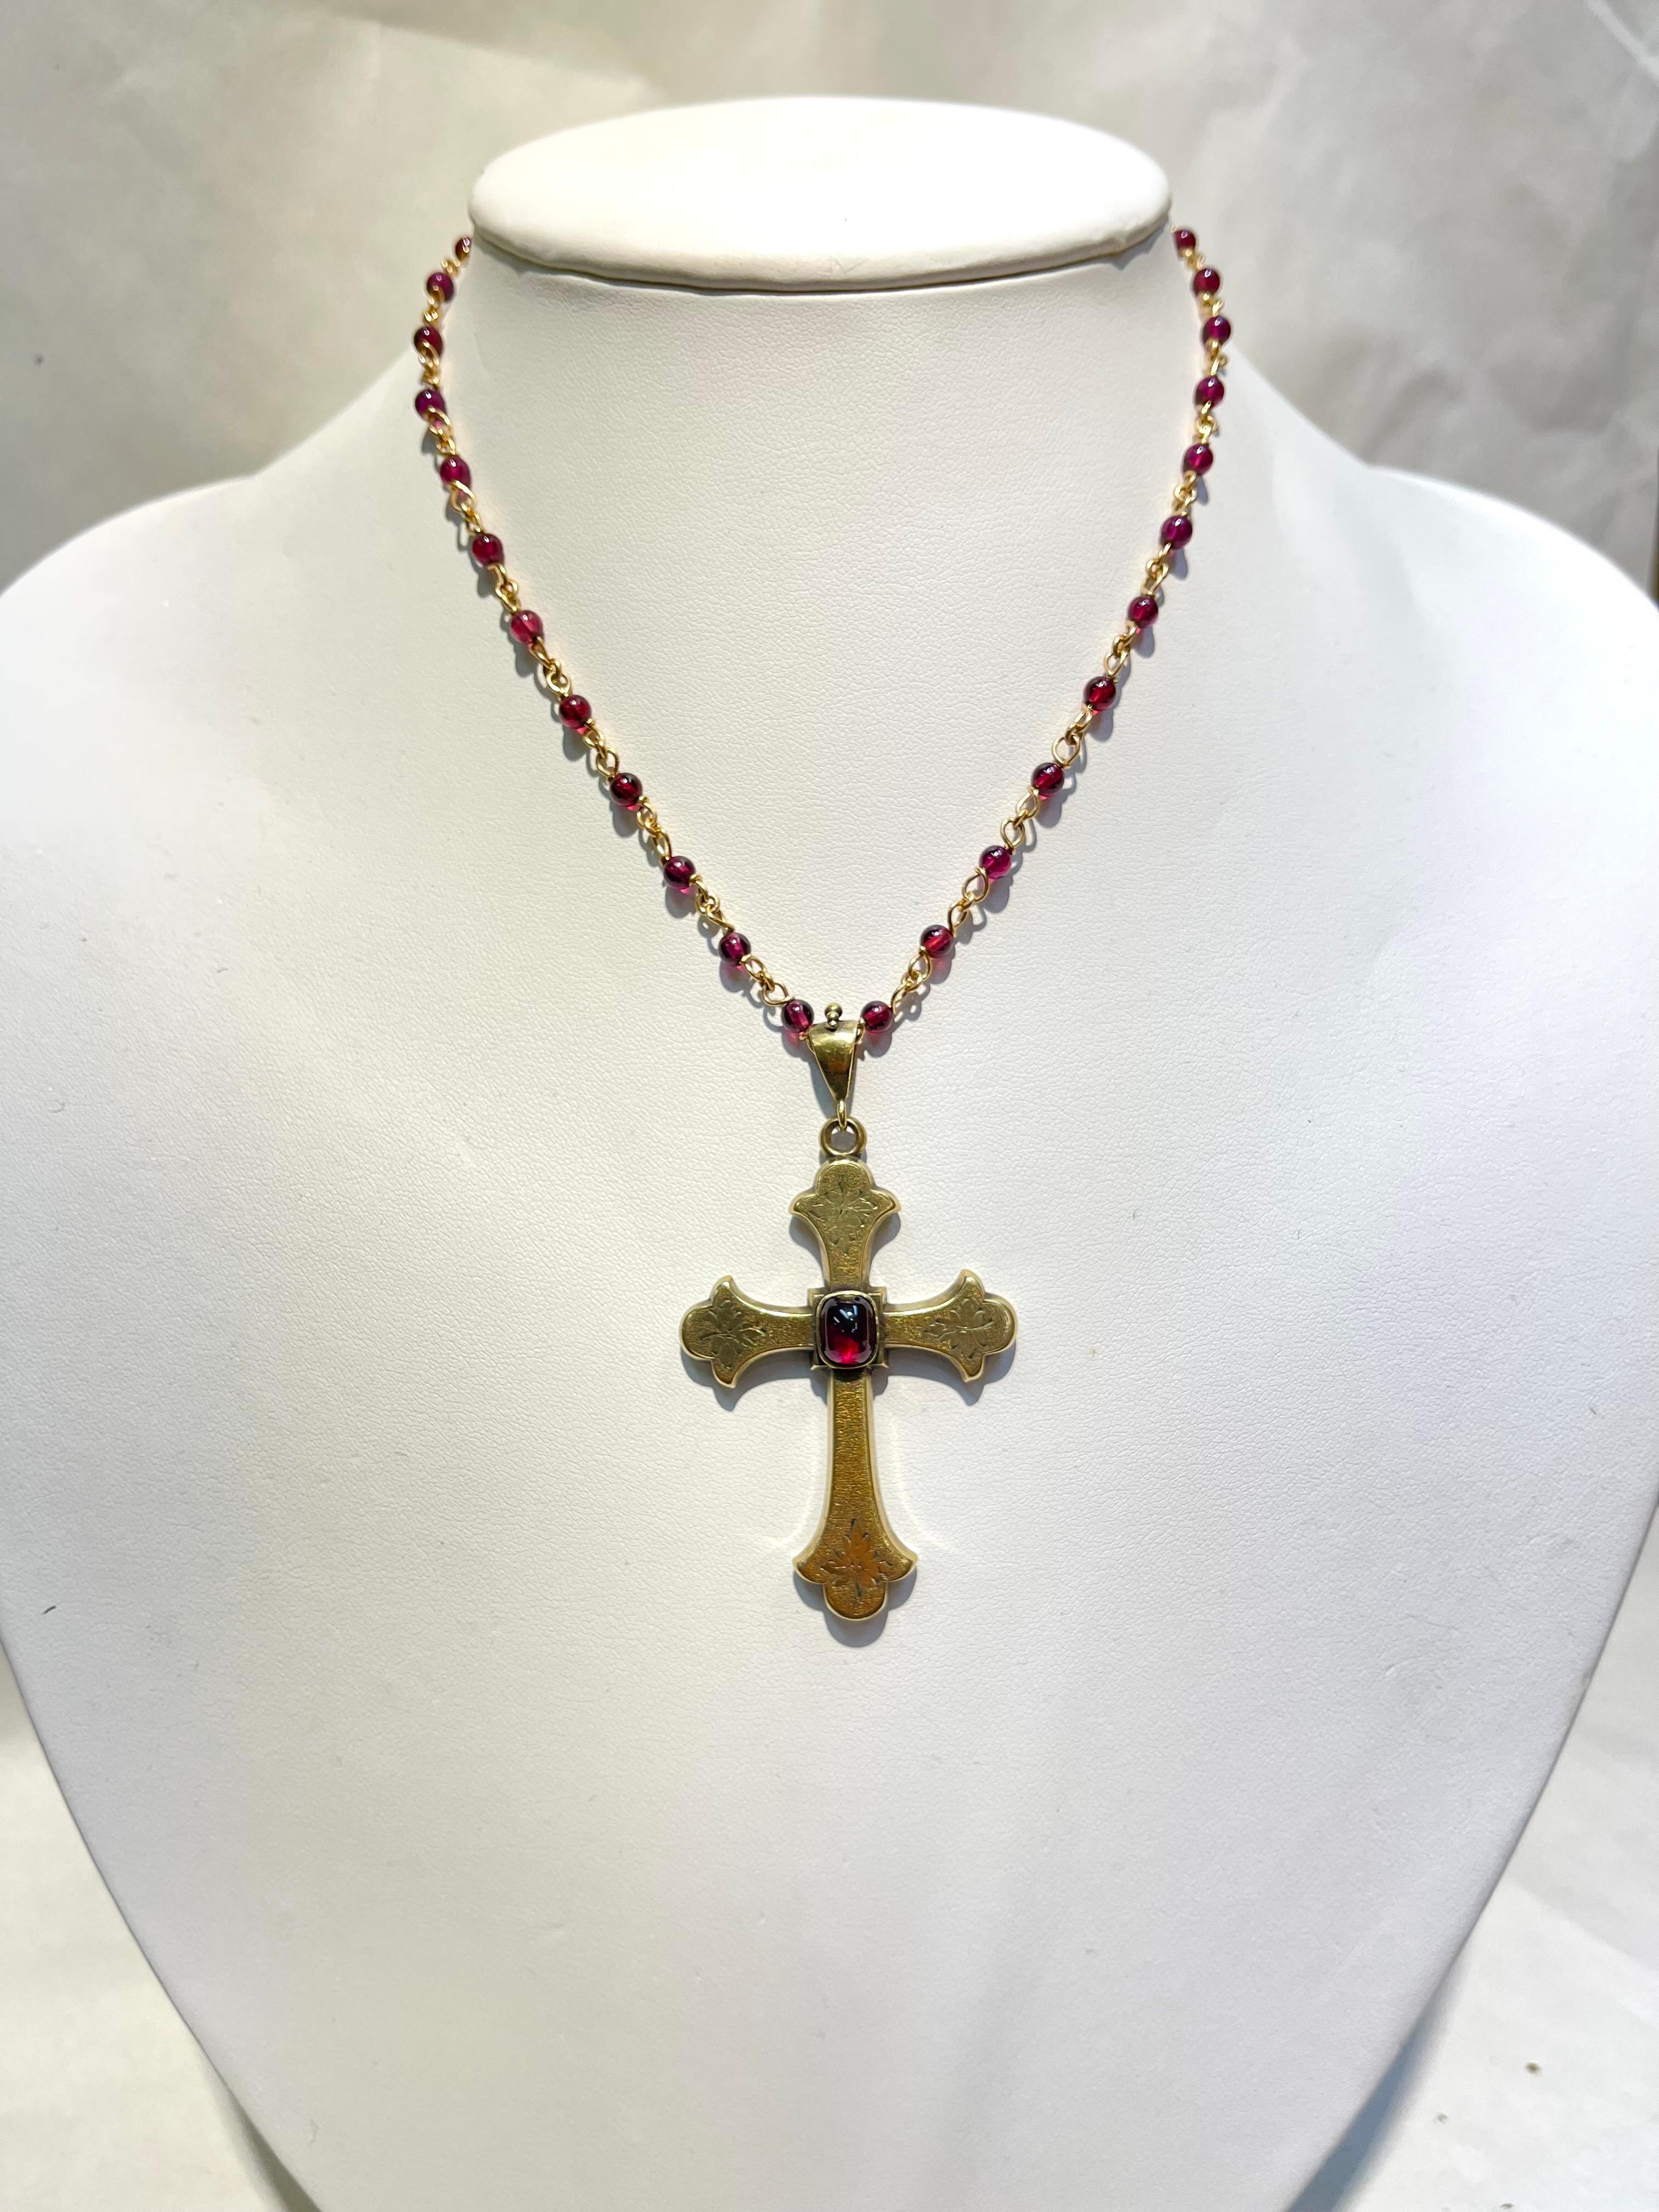 Antique Gold and Garnet Vintage Statement Cross Pendant and Necklace Simply Beautiful! The Cross centering a Cabochon Garnet is Hand crafted in 14 Karat Gold with engraved designs. Suspended from a 15.75” long Gold and Garnet Necklace. Approx. size